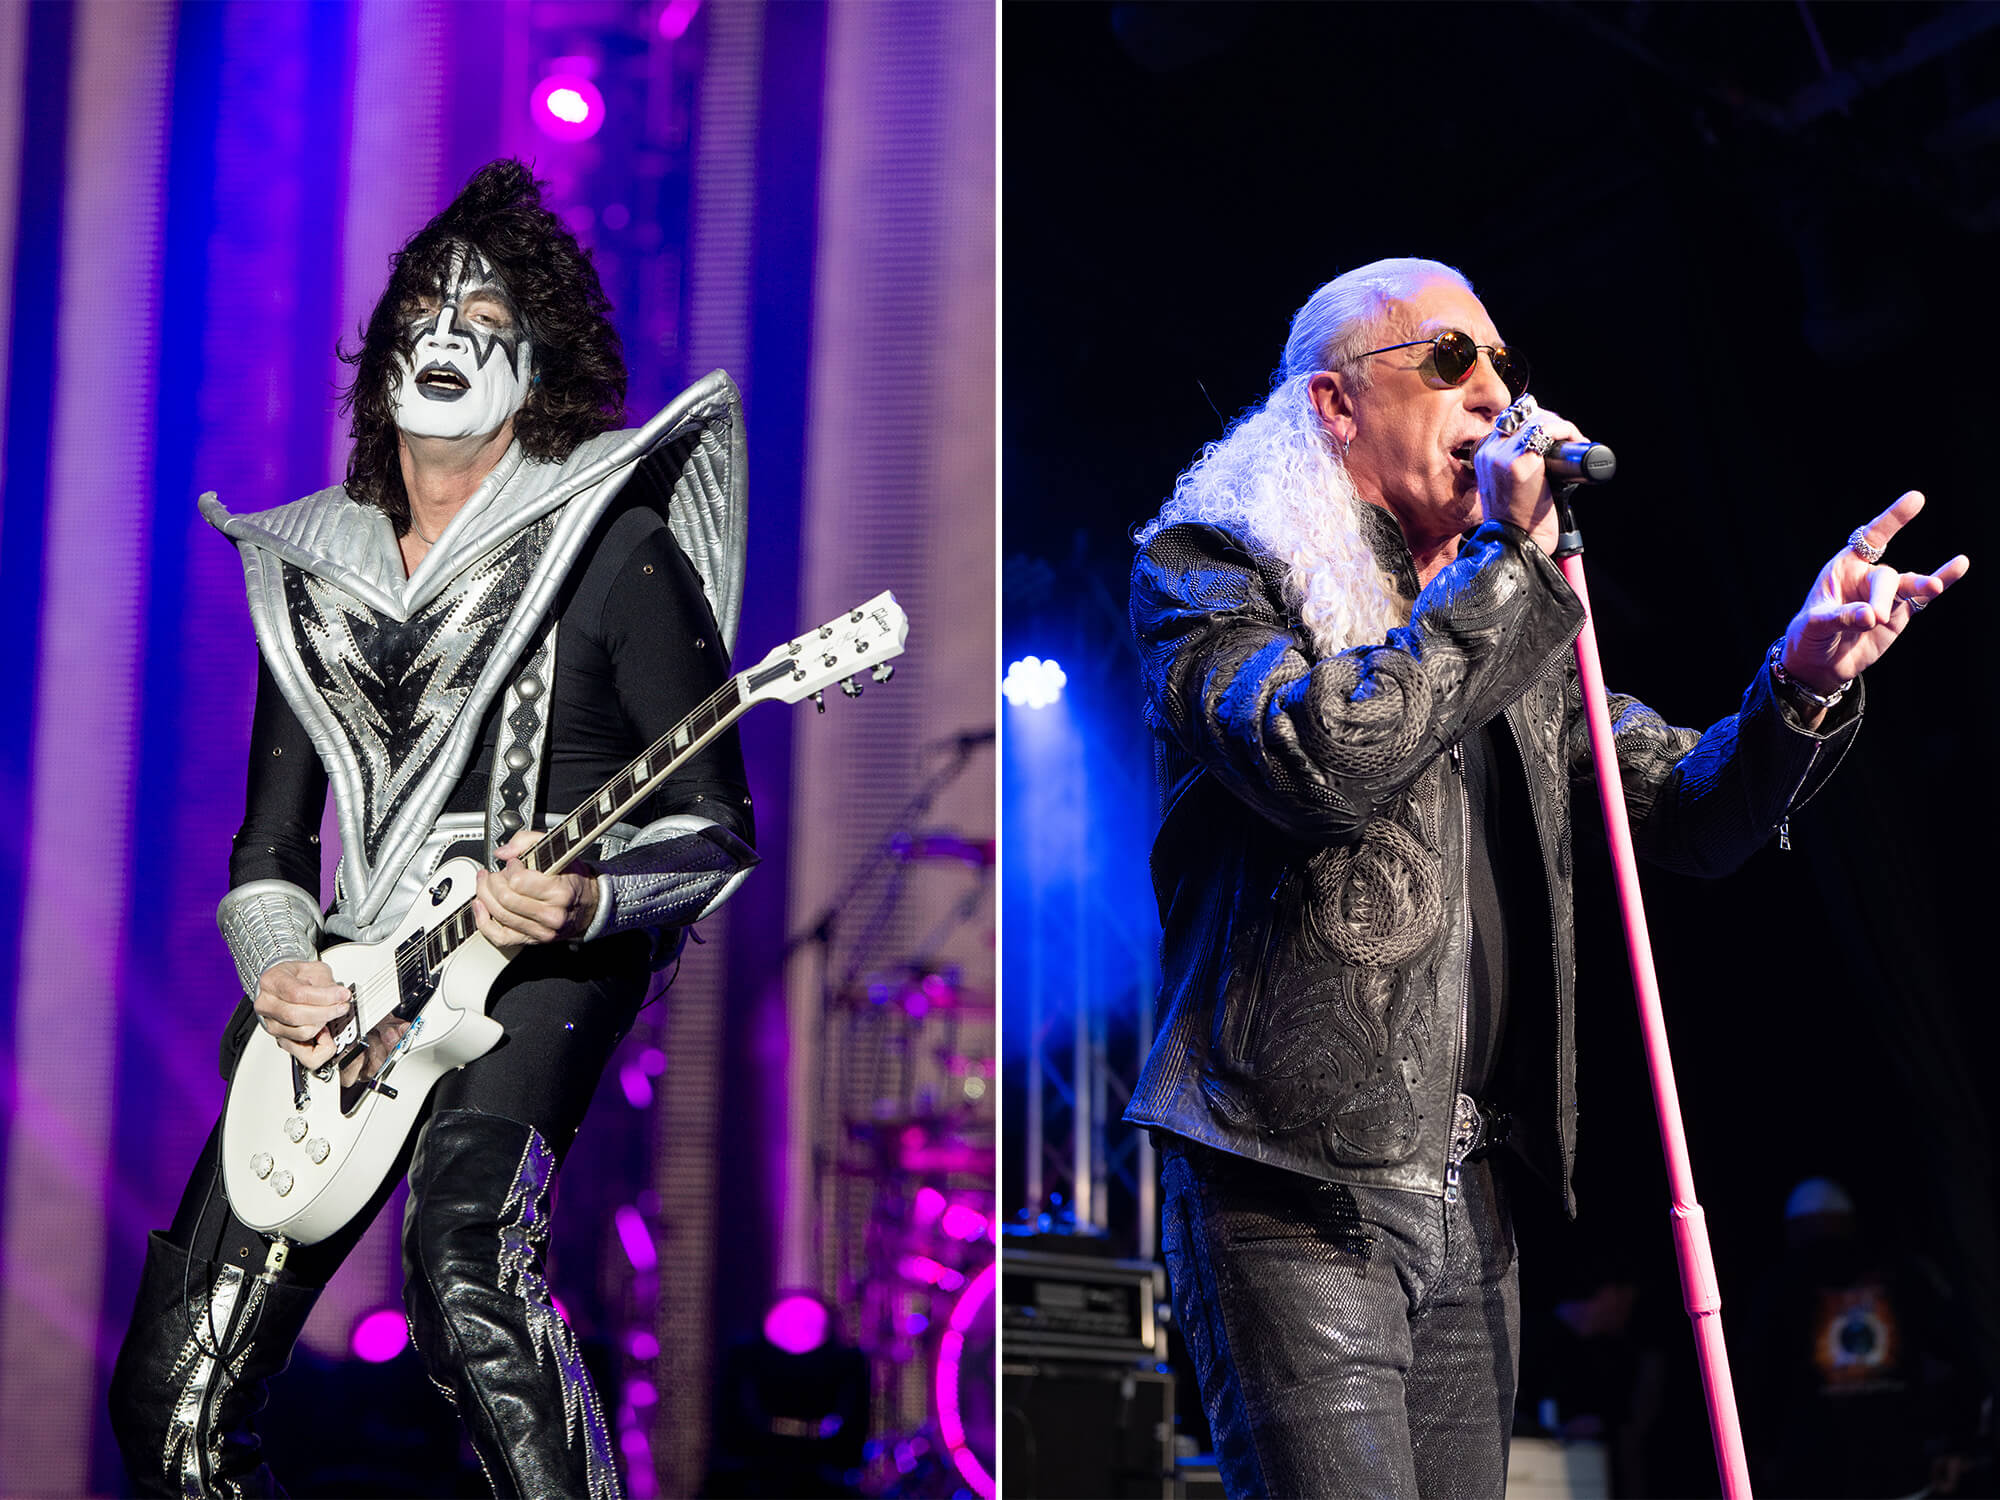 Left - Tommy Thayer of Kiss, with his black and white stage make up on. He is playing a white Gibson Les Paul. Right - Dee Snider on stage singing into a mic. He has white hair and is wearing sunglasses